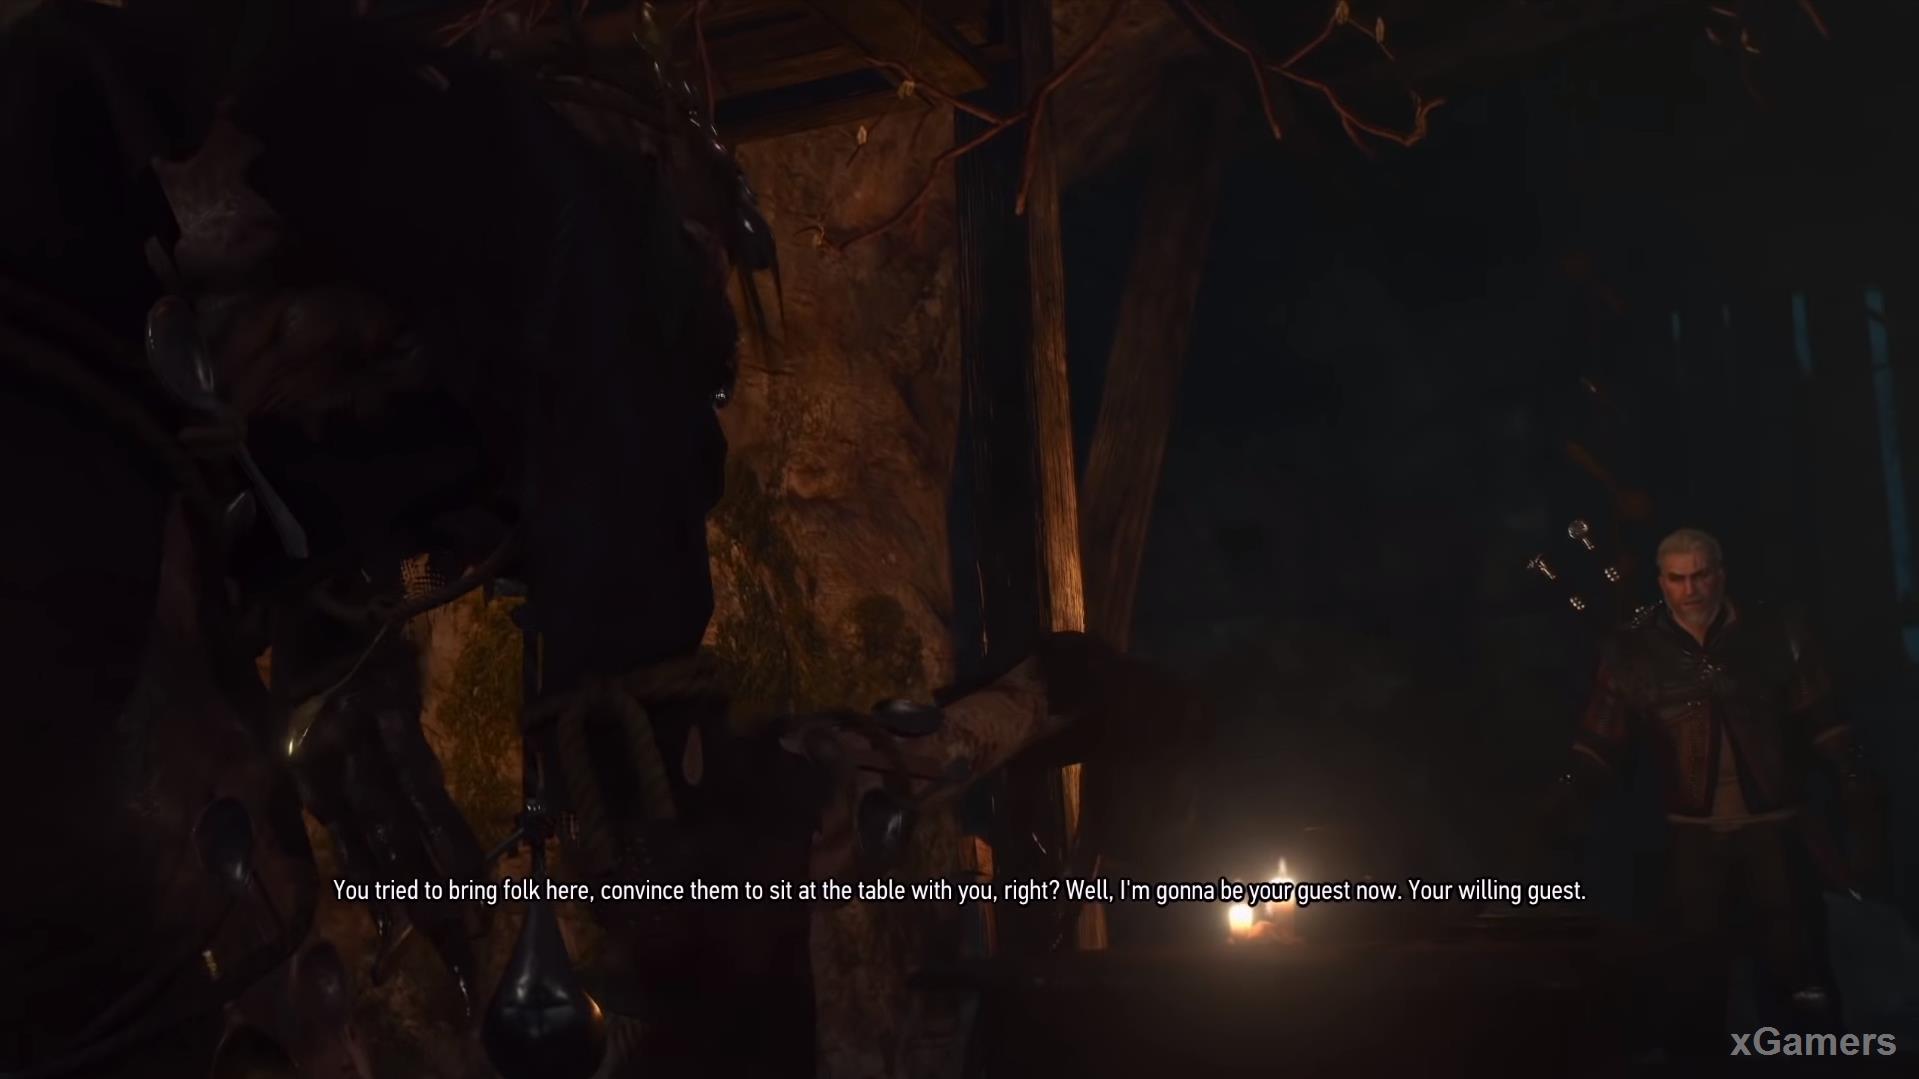 Geralt invites Wight to sit down at the table and start eating